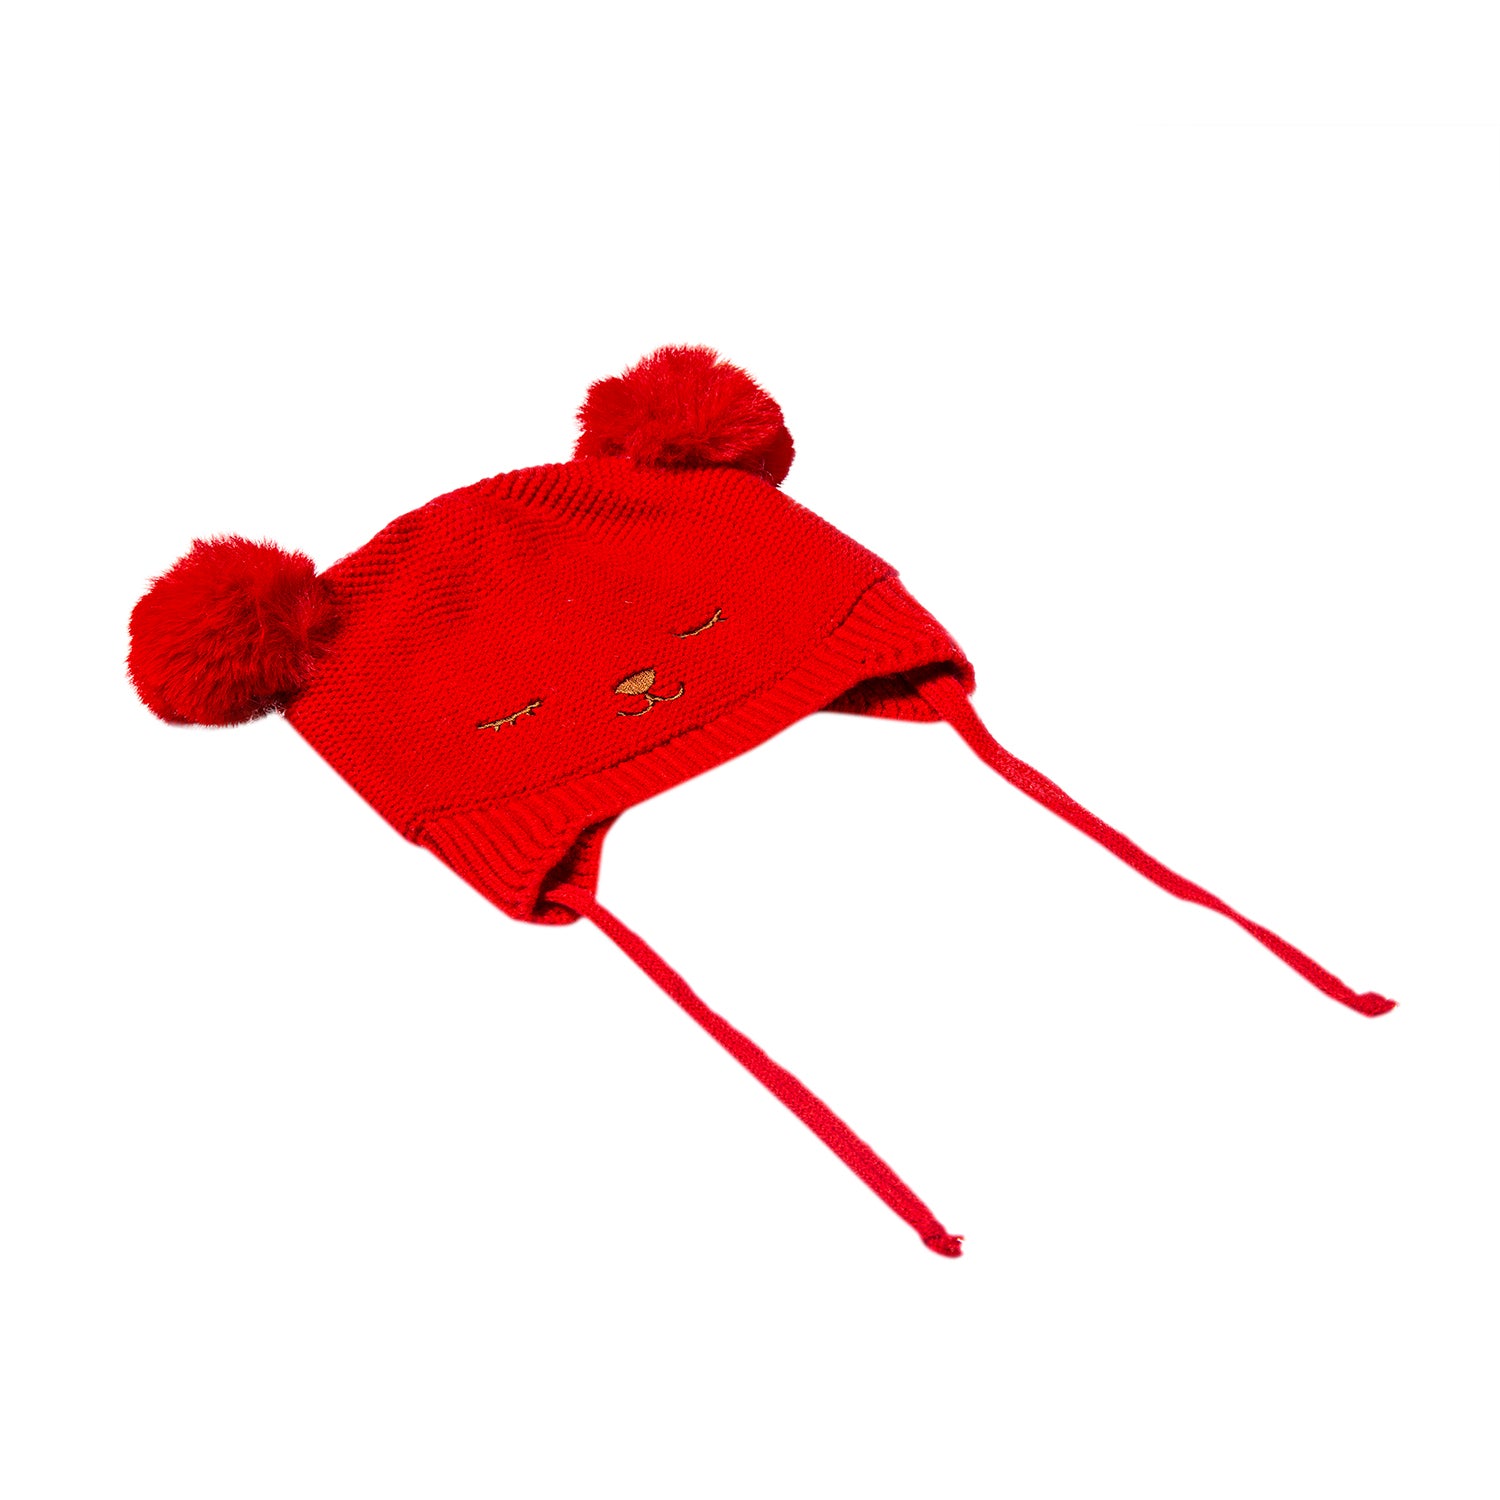 Knit Woollen Cap With Tie Knot For Ear Cover Sleeping Pom Pom Red - Baby Moo